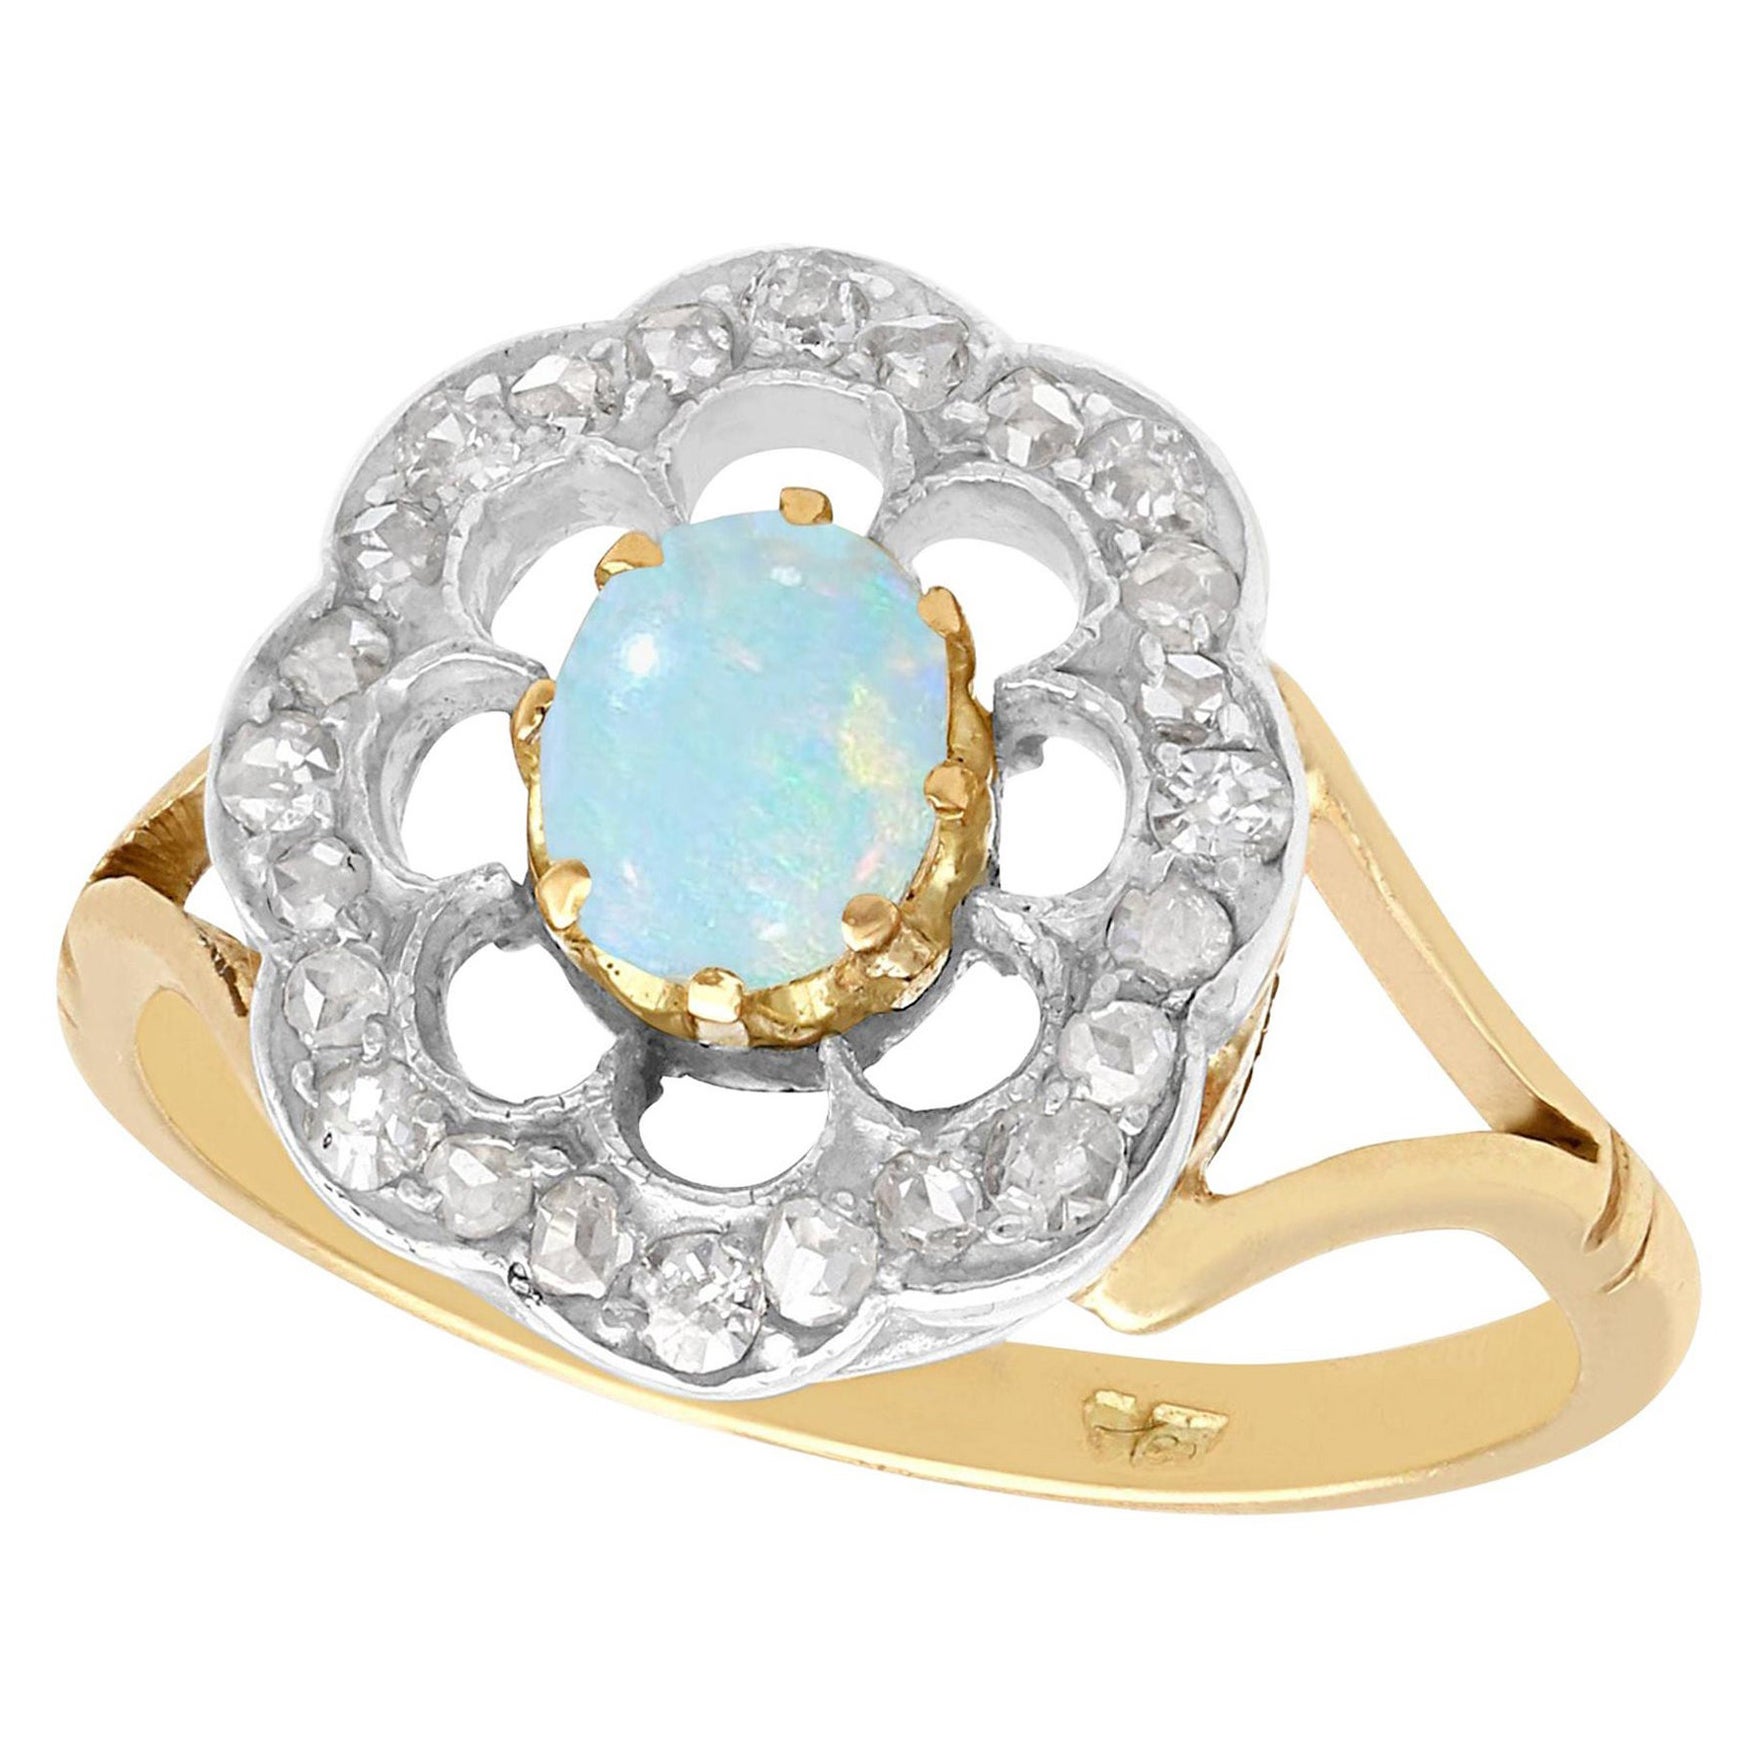 Antique Cabochon Cut Opal and Diamond Yellow Gold Dress Ring